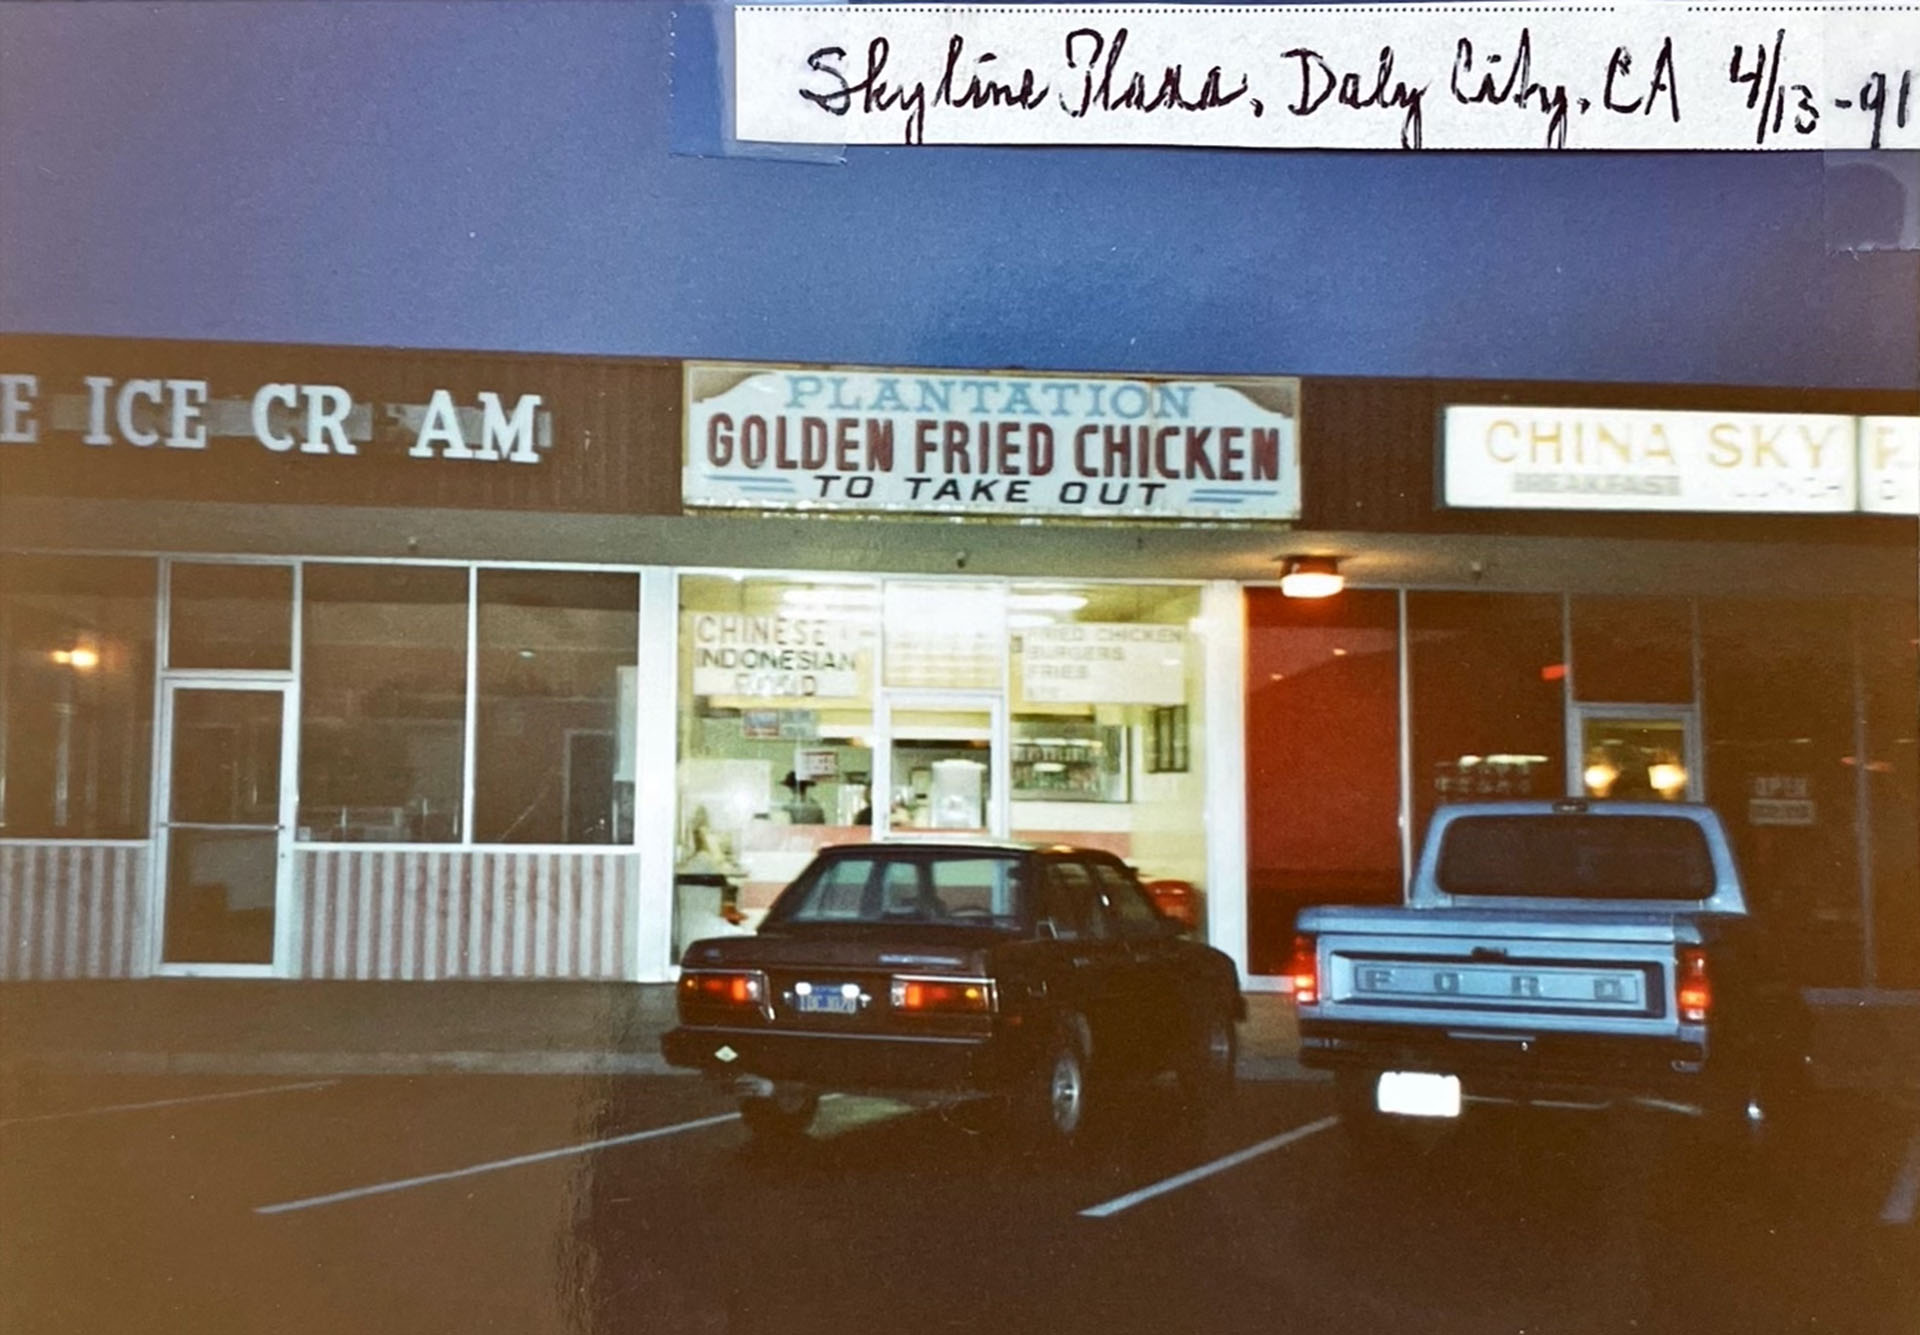 Photograph dated April 13, 1991 shows the facade of a strip mall restaurant at dusk. The sign reads, "Plantation Golden Fried Chicken" in red letters.